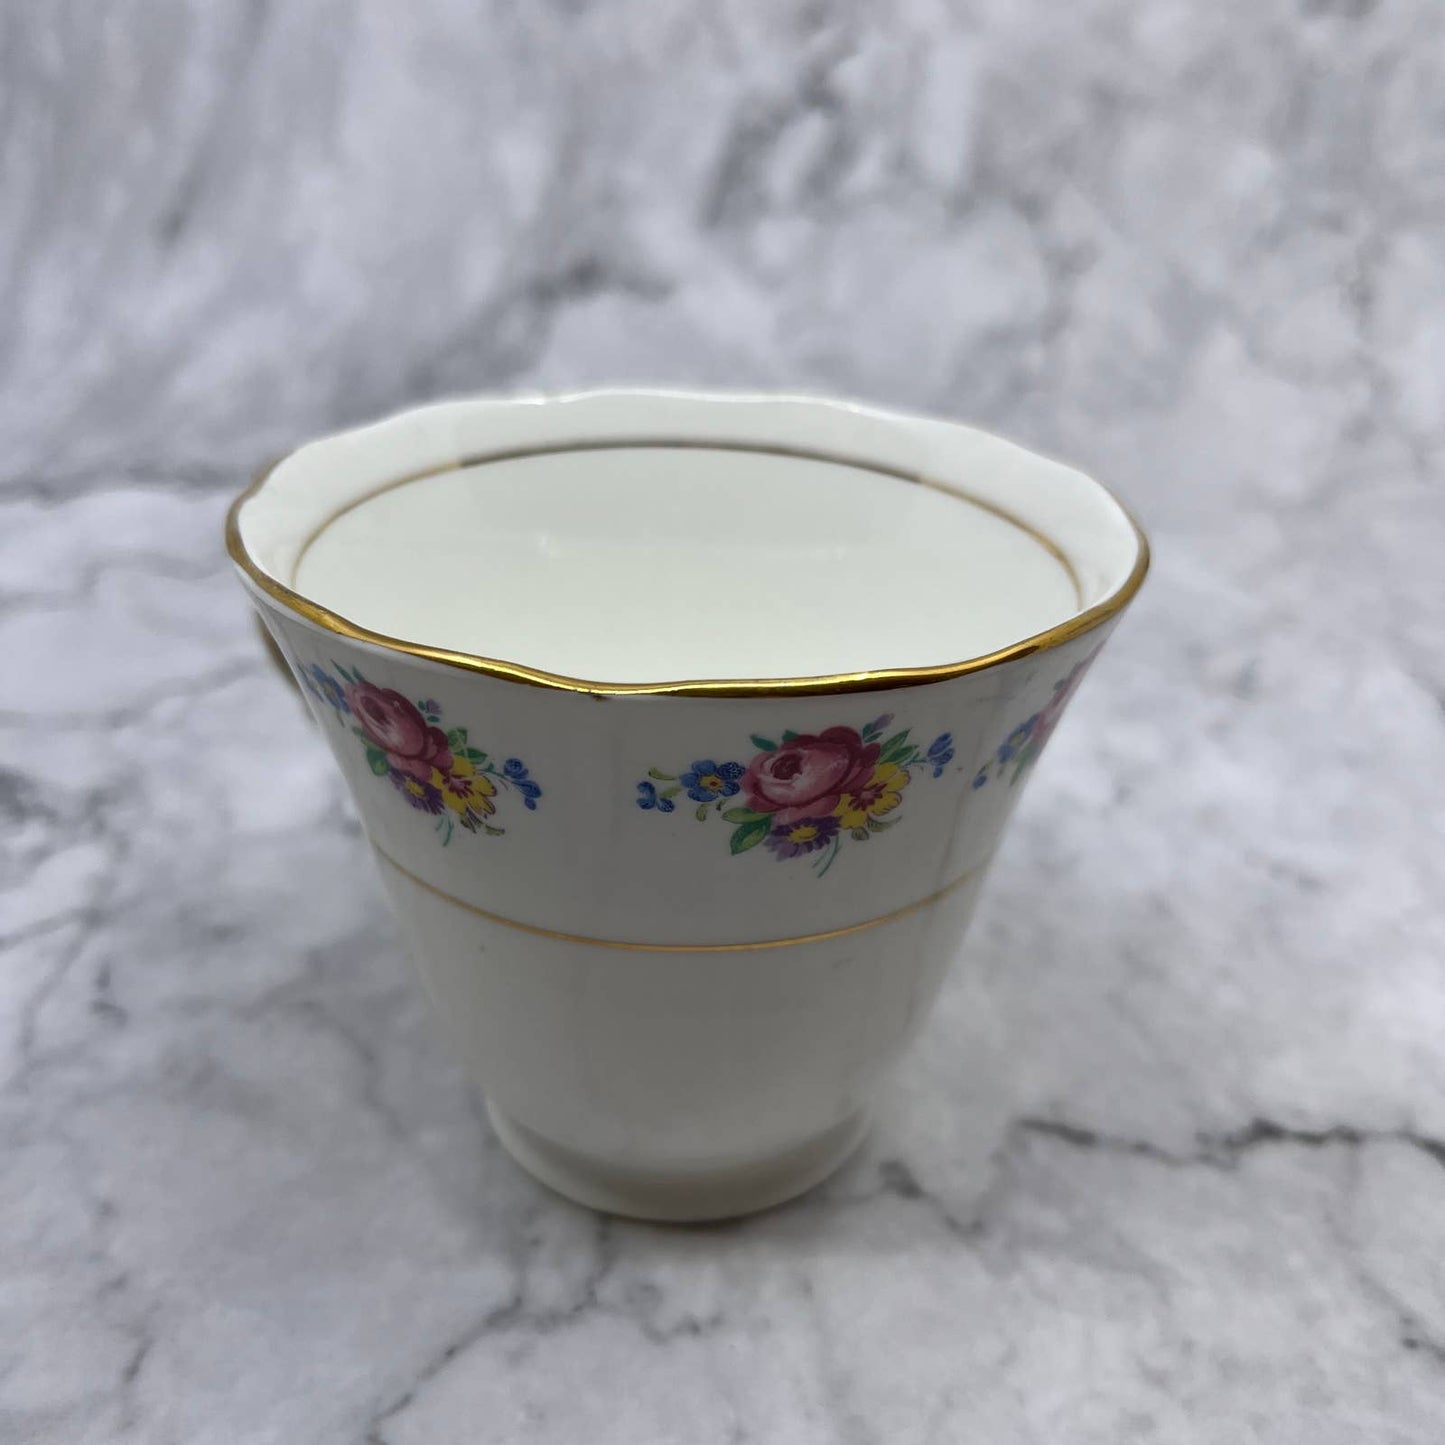 Colclough Teacup and Saucer Spring Bouquet Floral Pattern Bone China TD1